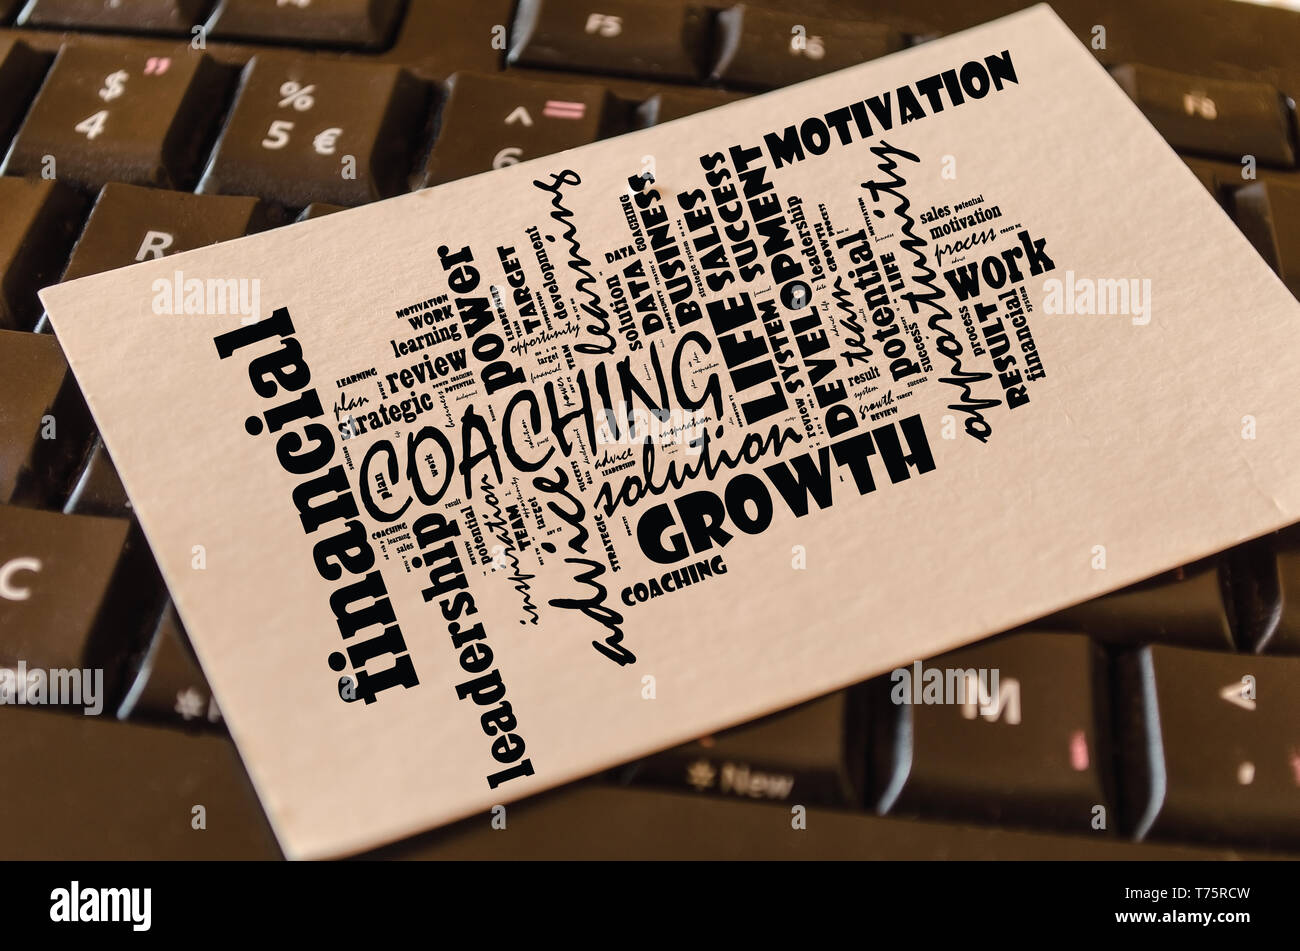 Coaching word cloud collage over keyboard background Stock Photo